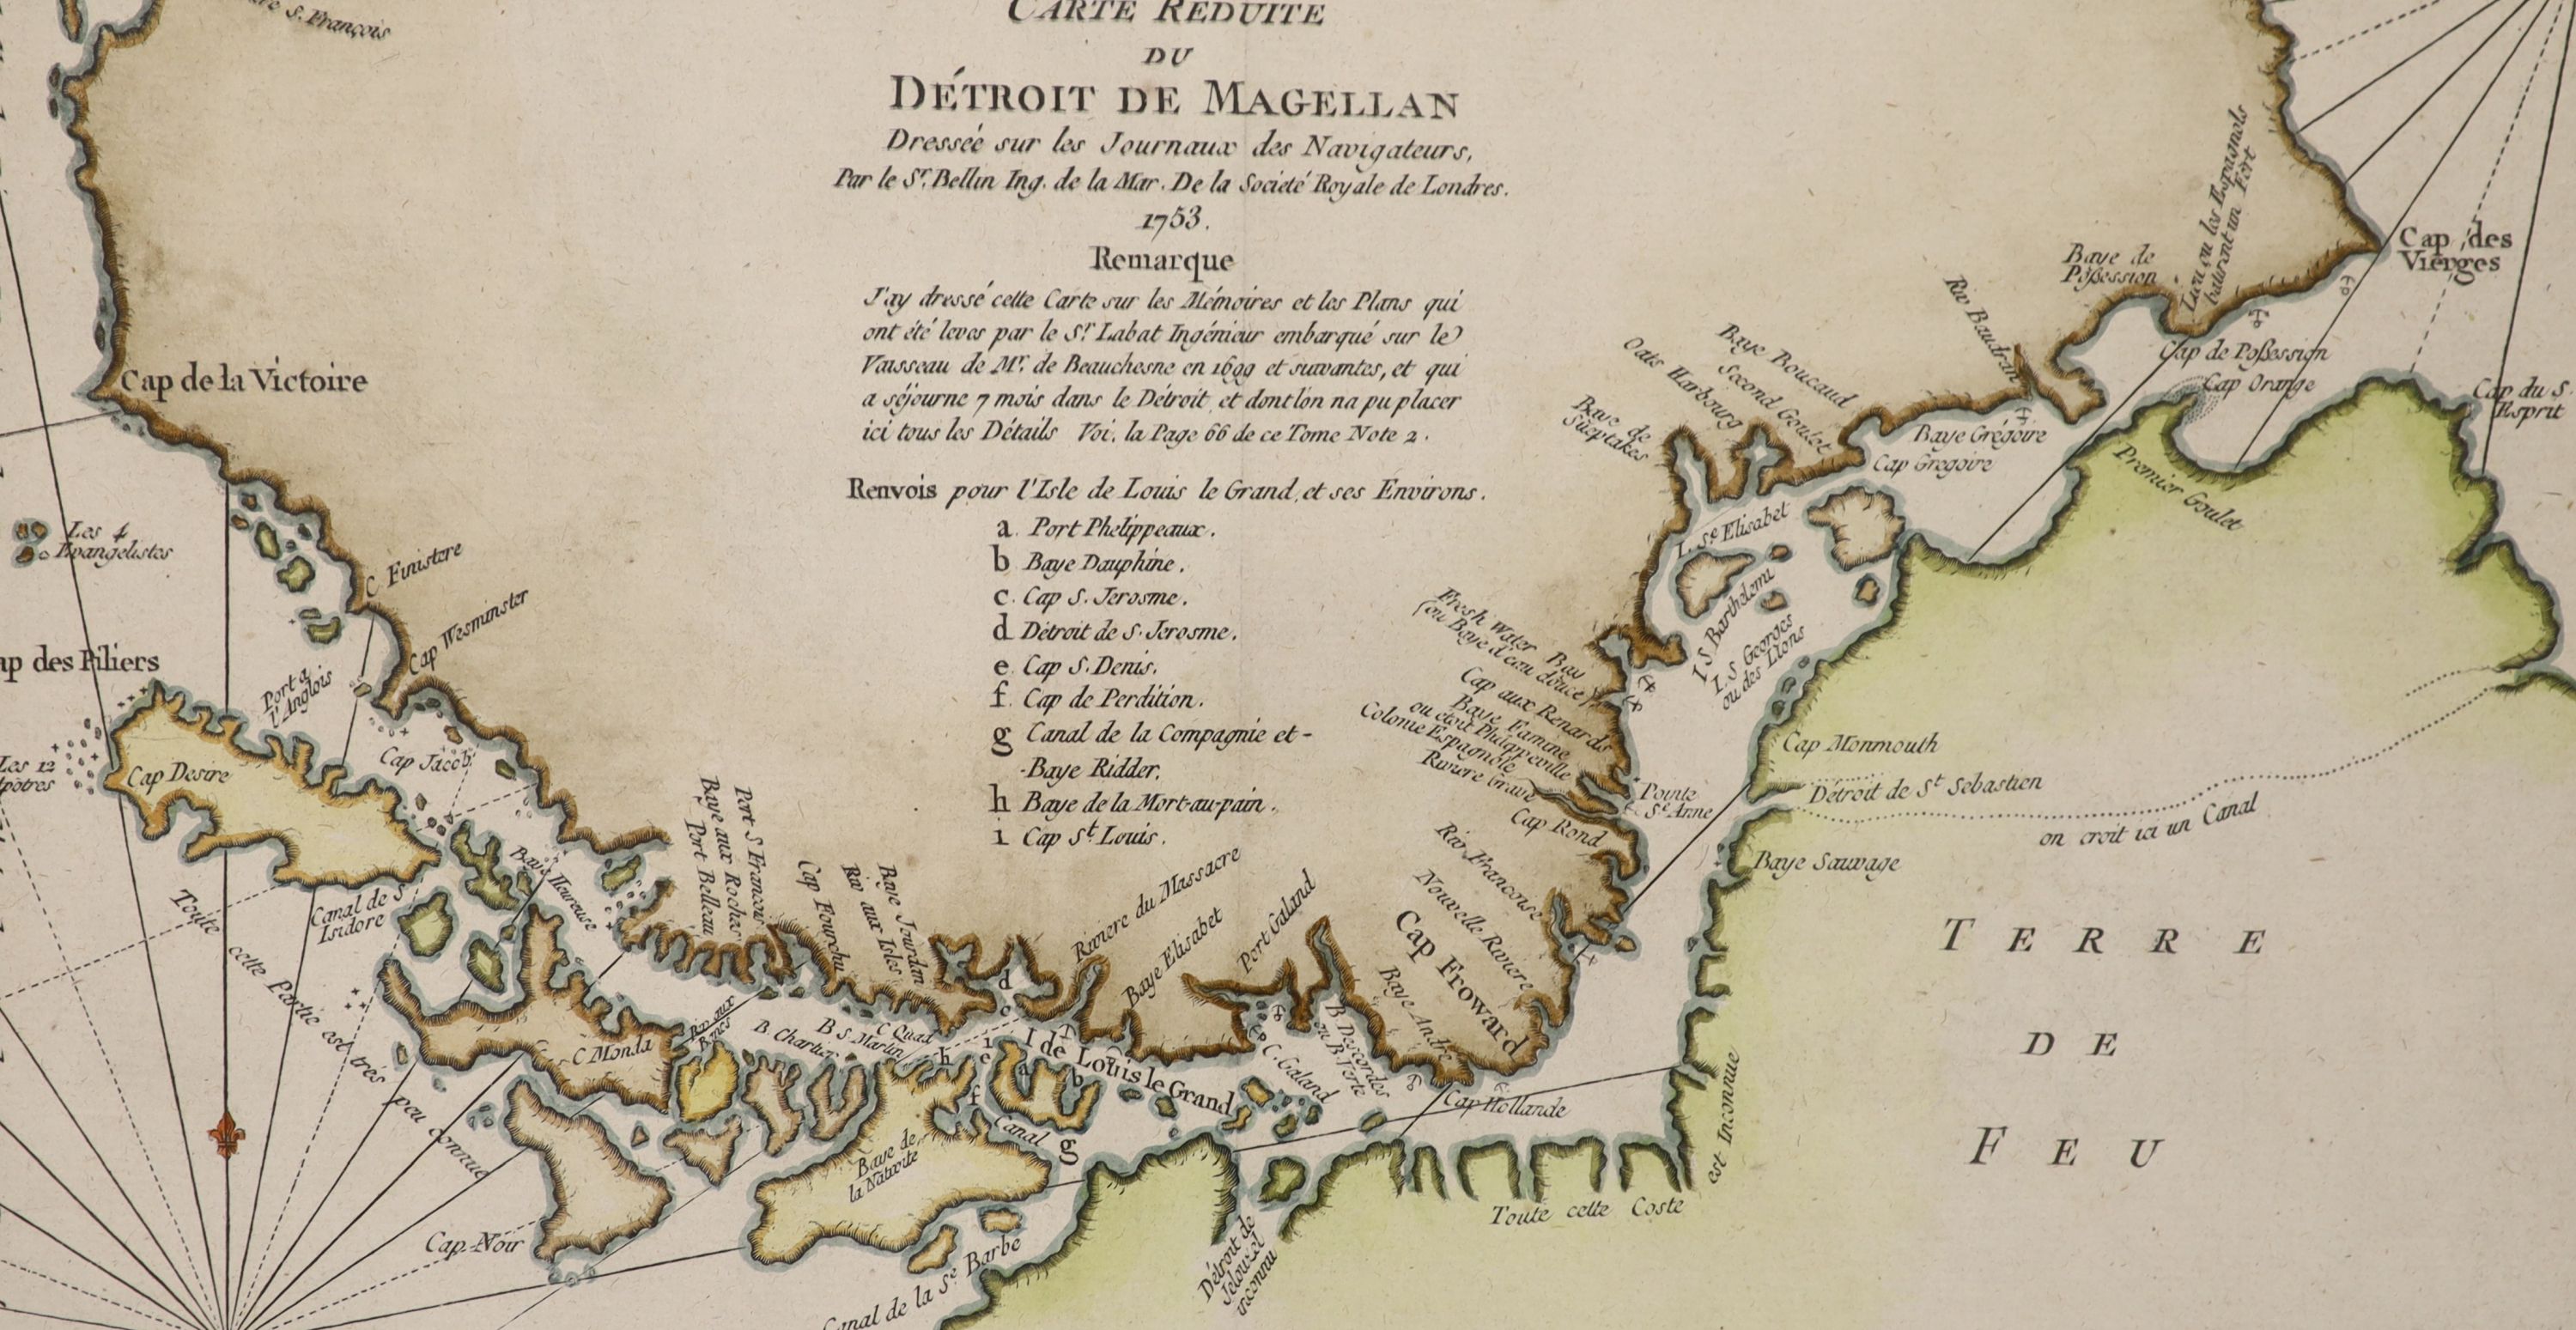 18th century French School, coloured engraving, Map of the Straits of Magellan, 19.5 x 35cm and a Map of the Strait of Maire, 21 x 28cm